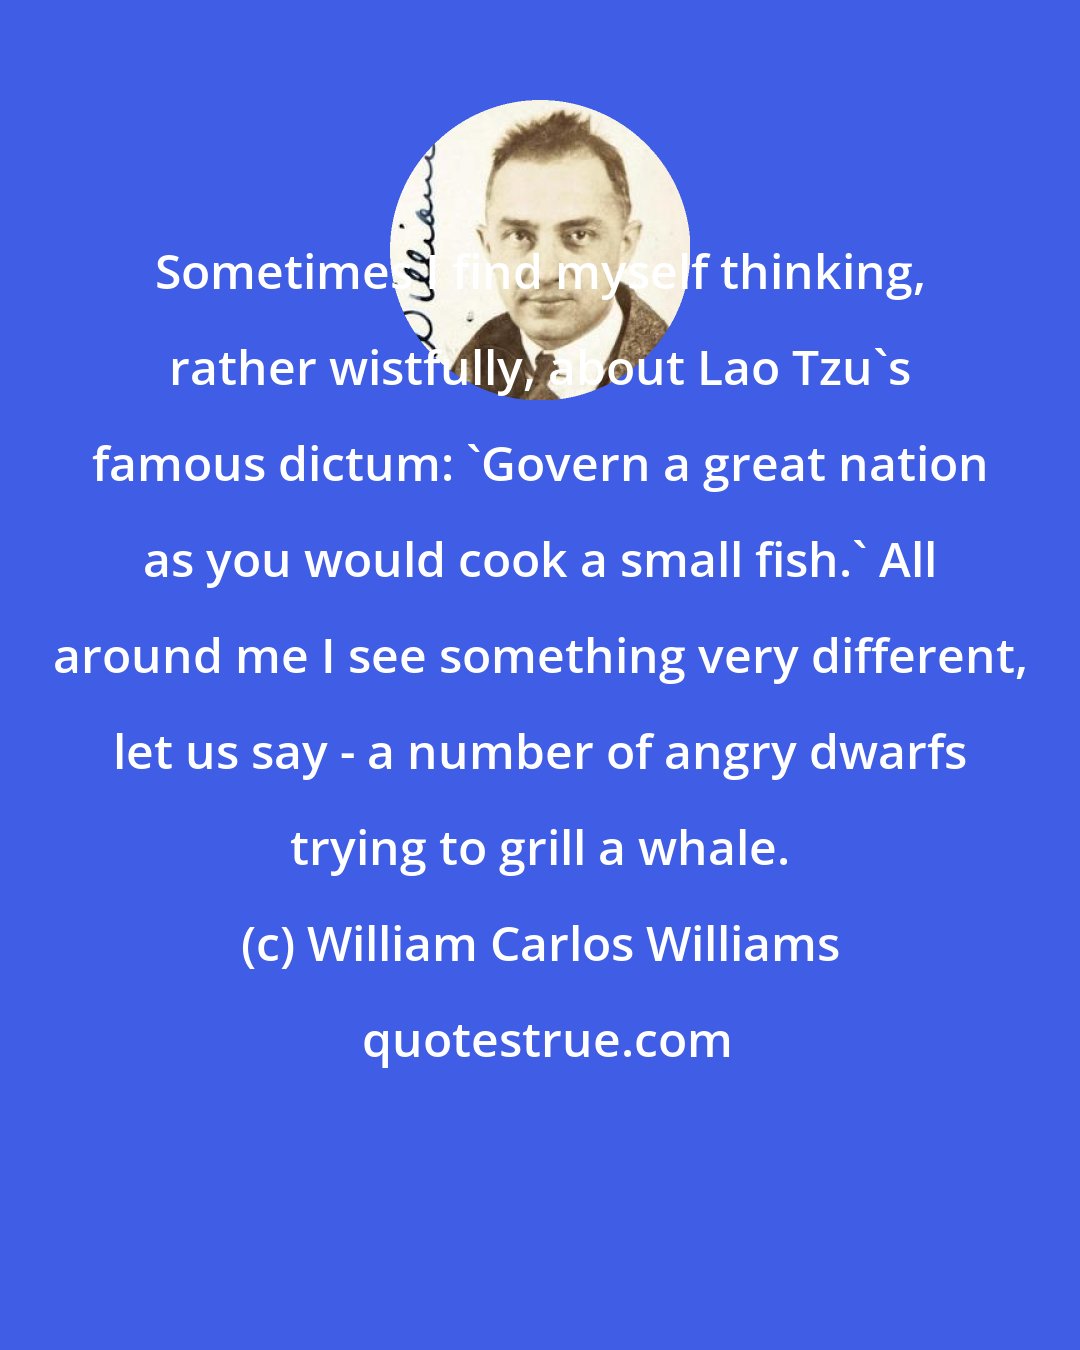 William Carlos Williams: Sometimes I find myself thinking, rather wistfully, about Lao Tzu's famous dictum: 'Govern a great nation as you would cook a small fish.' All around me I see something very different, let us say - a number of angry dwarfs trying to grill a whale.